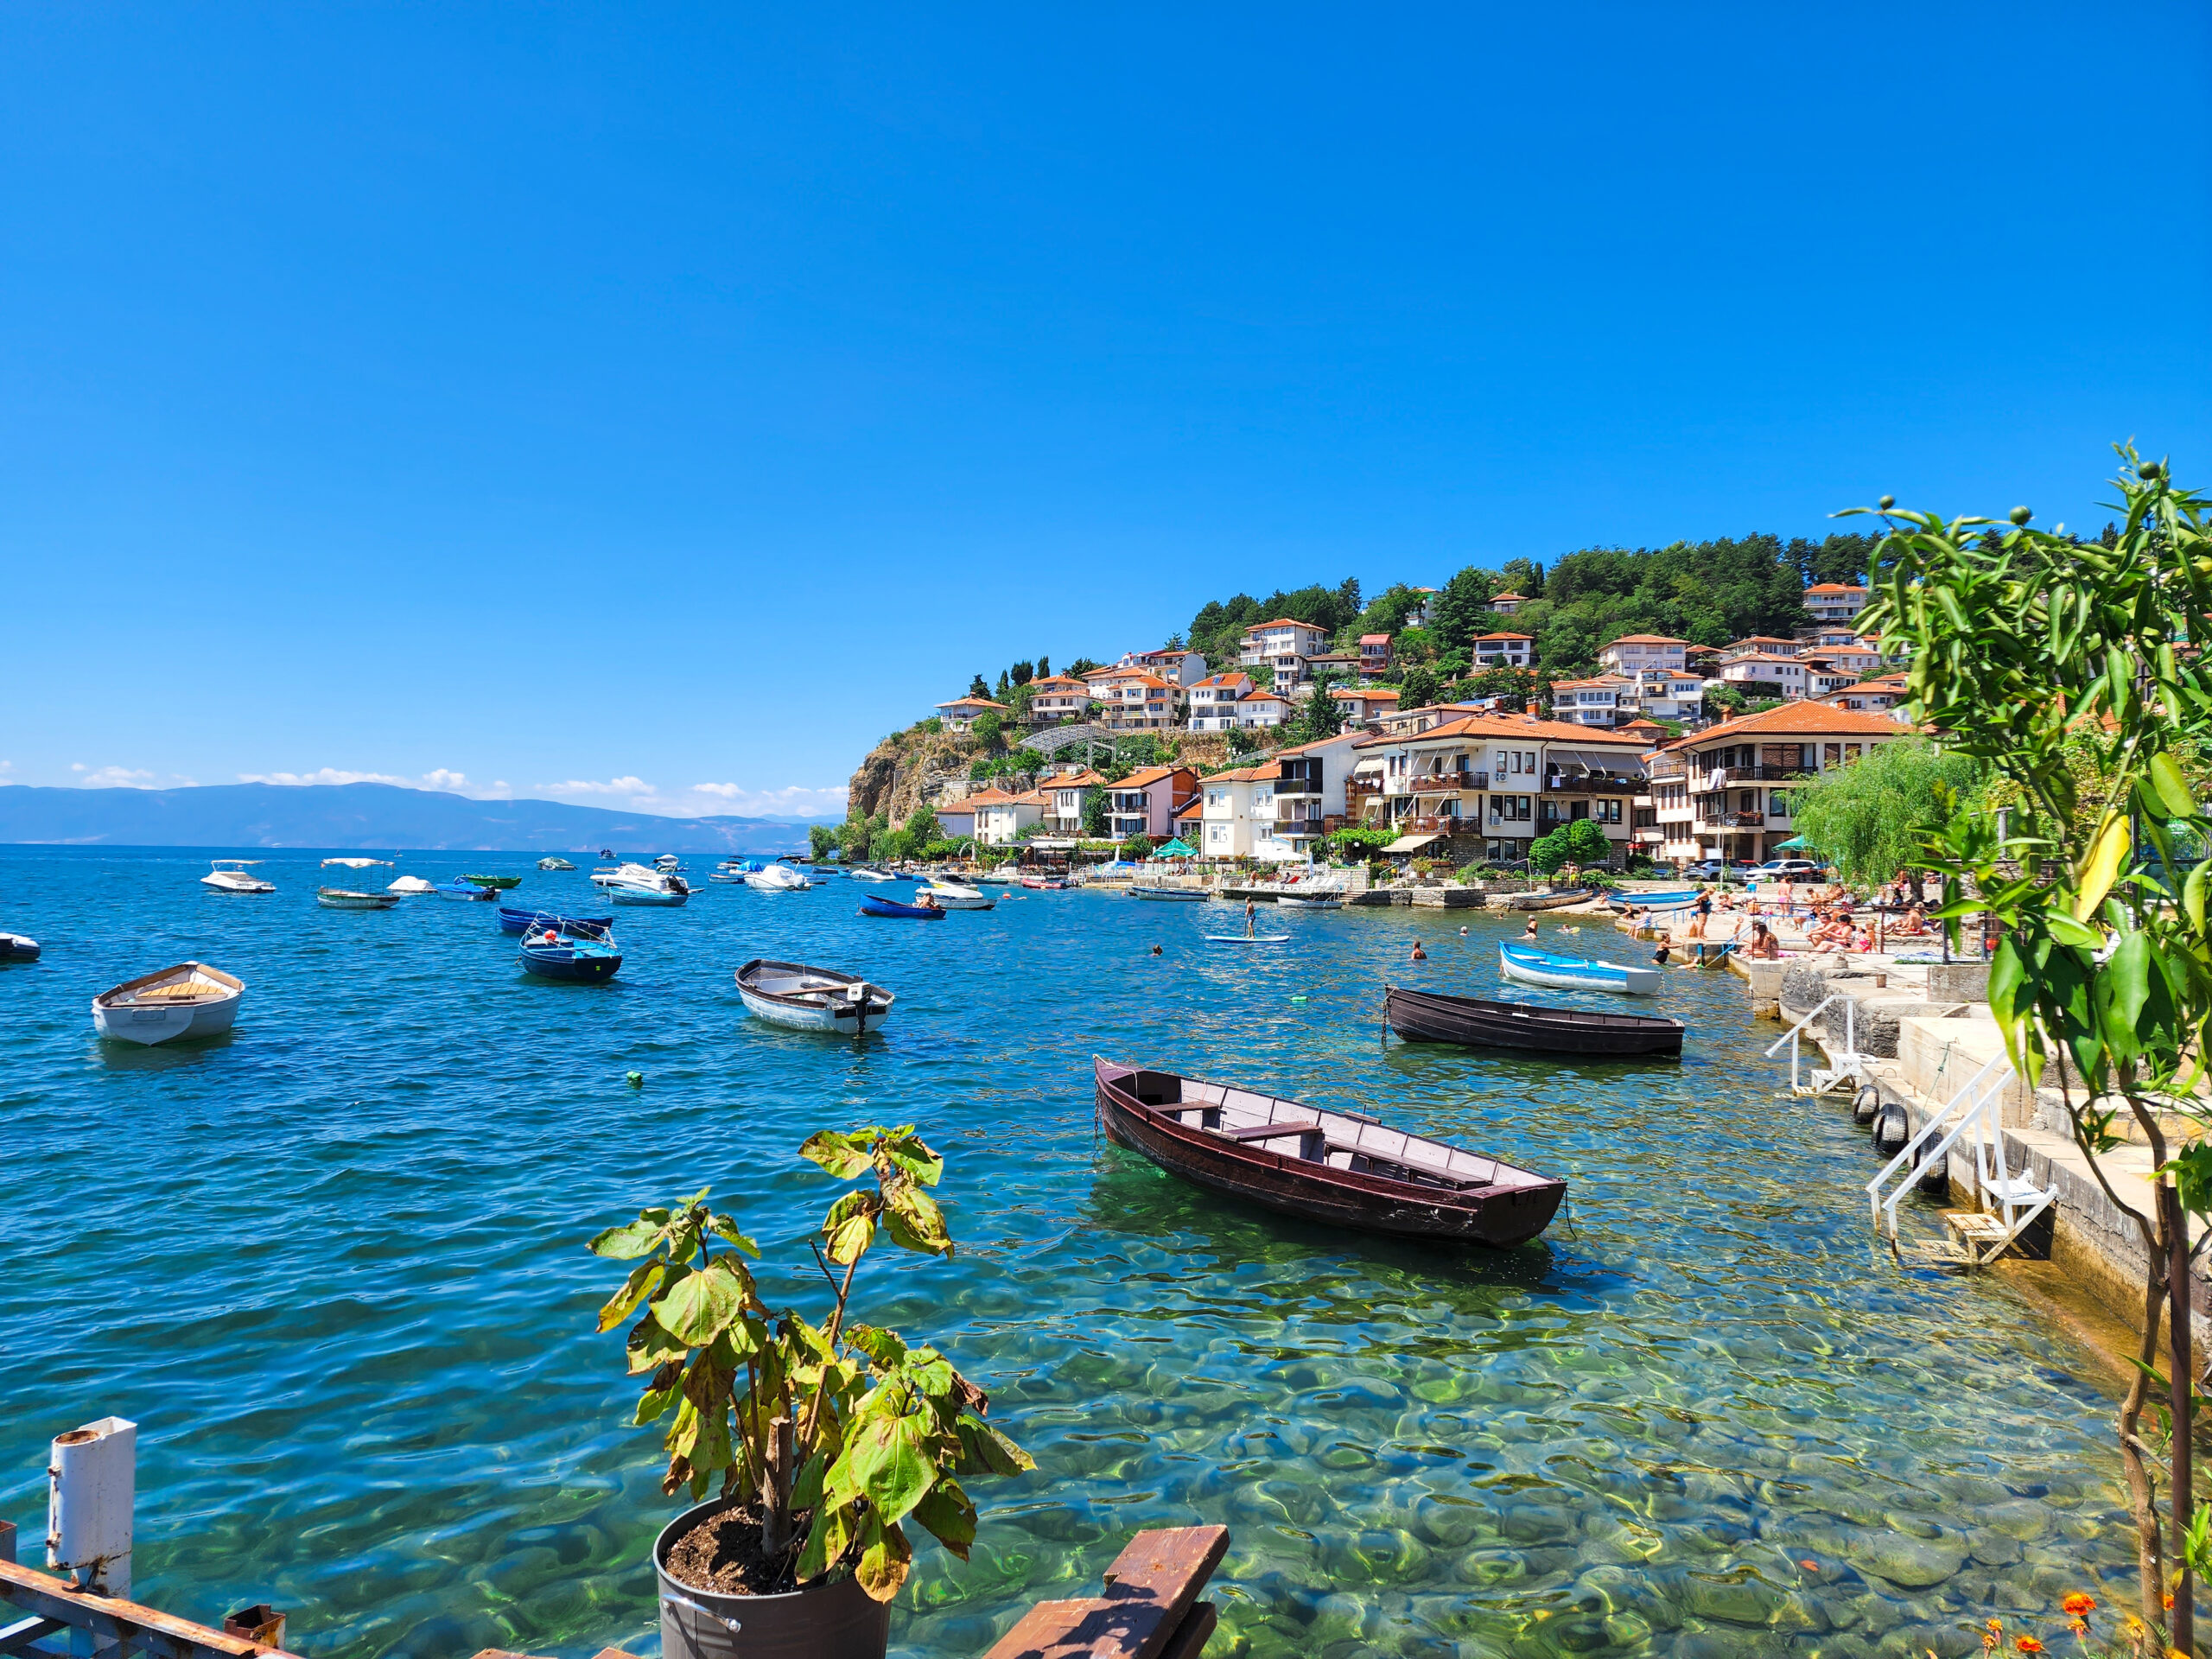 Lake Ohrid - The Pearl Of The Balkans - 2 Cups of Travel